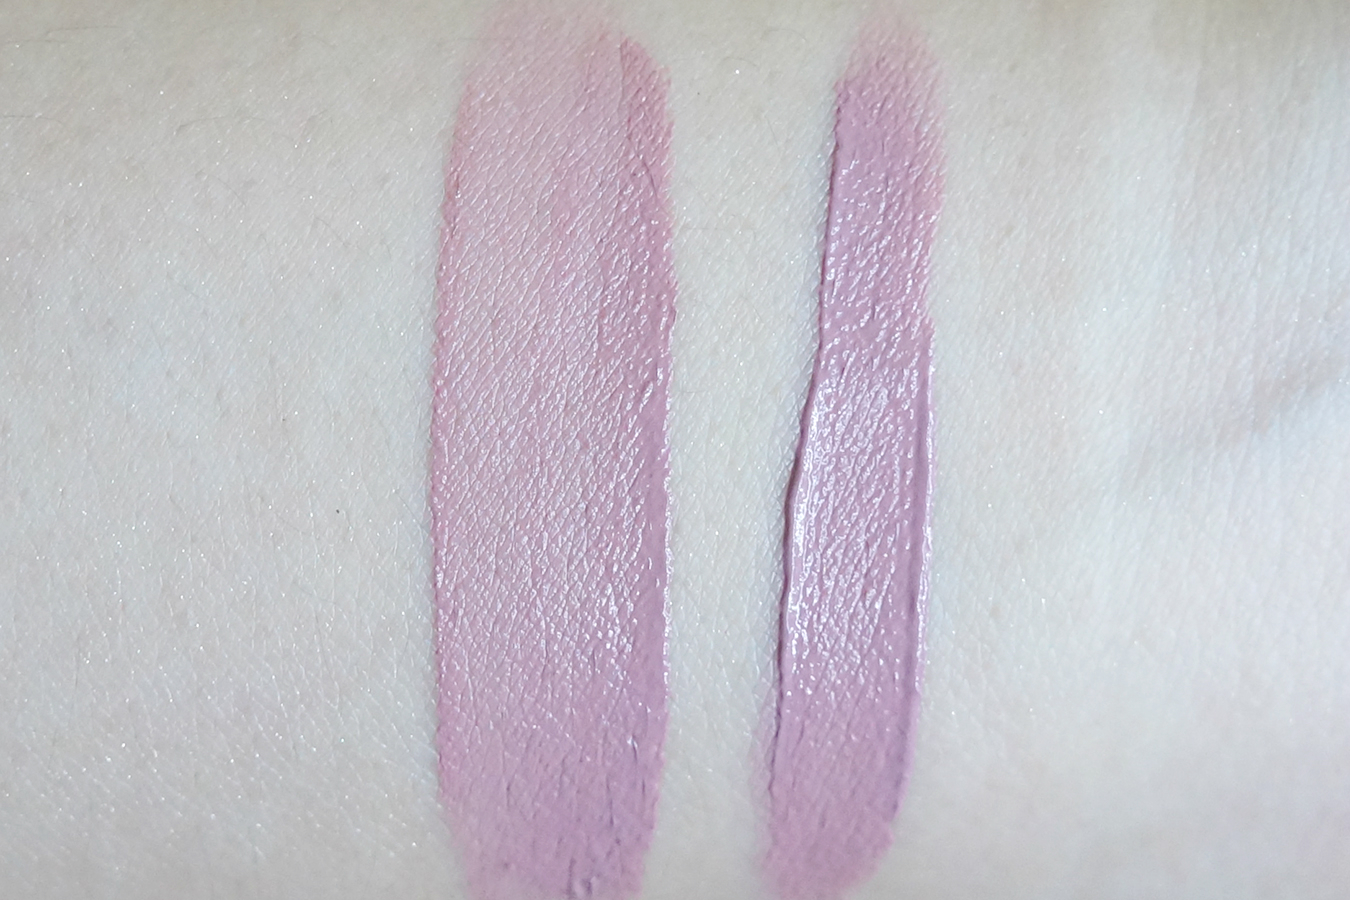 Burberry Liquid Lip Velvet in Fawn Rose No. 09 | Review, Photos, Swatches -  Jello Beans